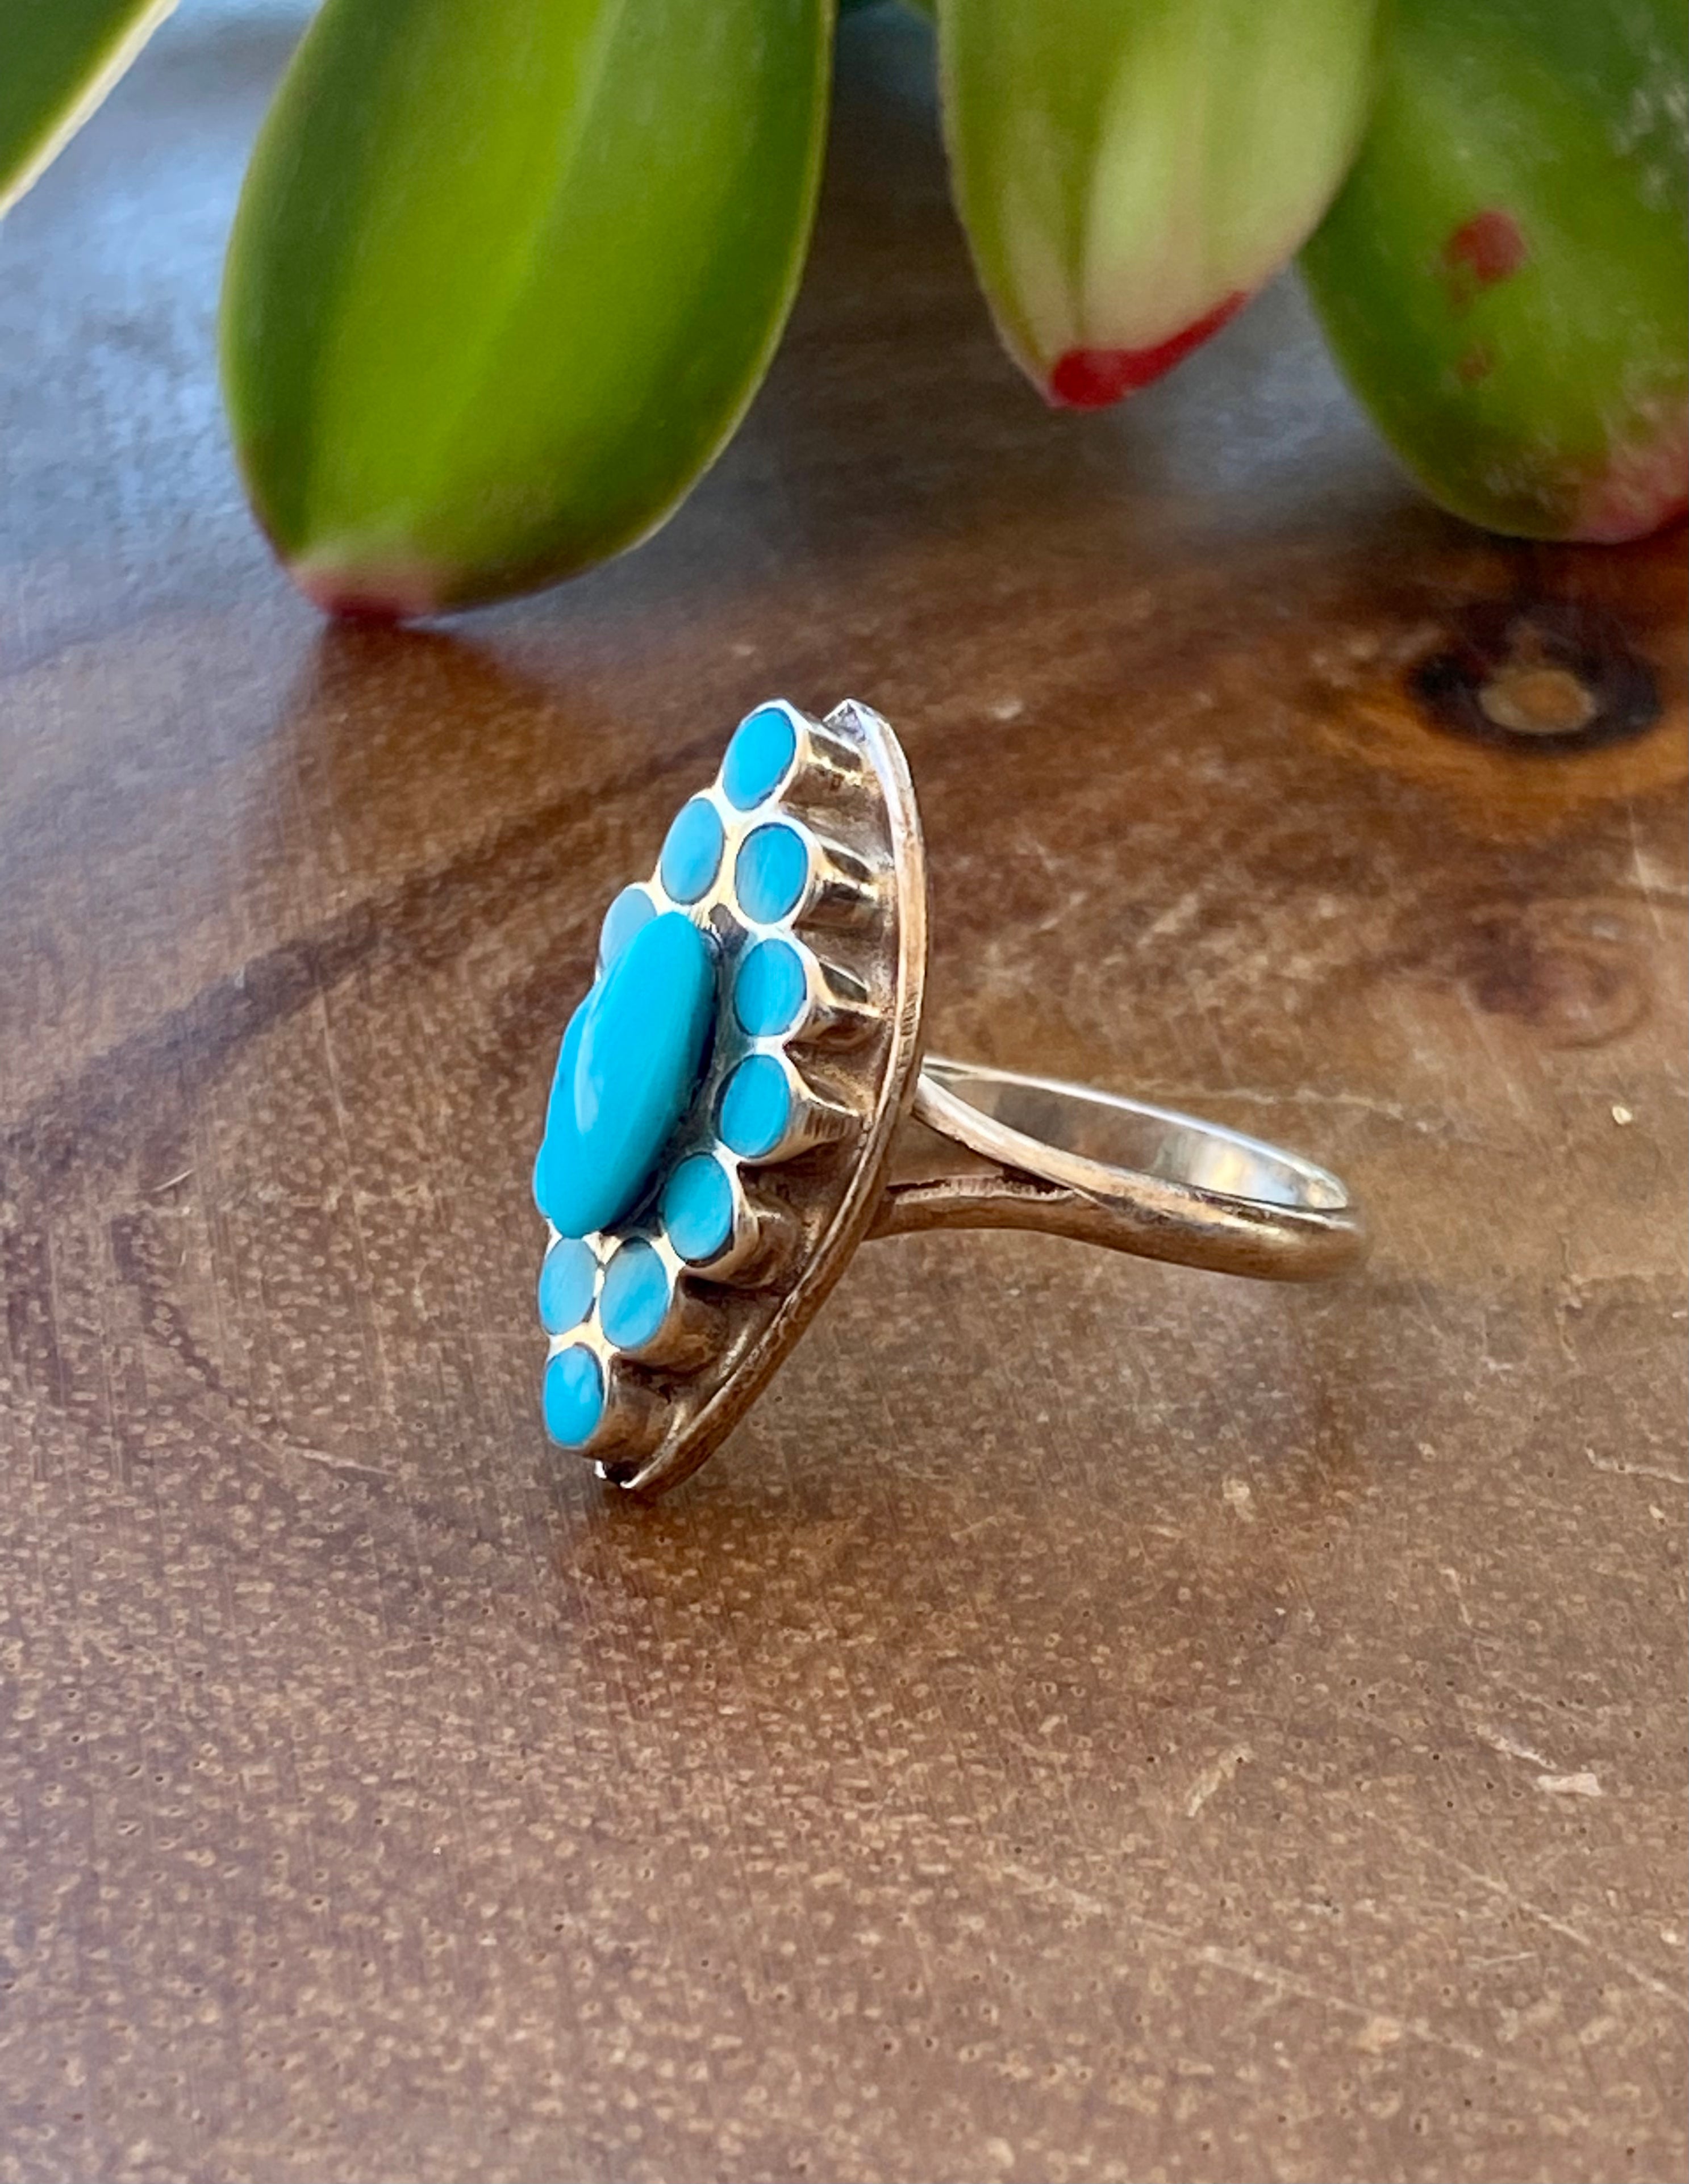 Zuni Made Turquoise & Sterling Silver Inlay Ring Size 7.75